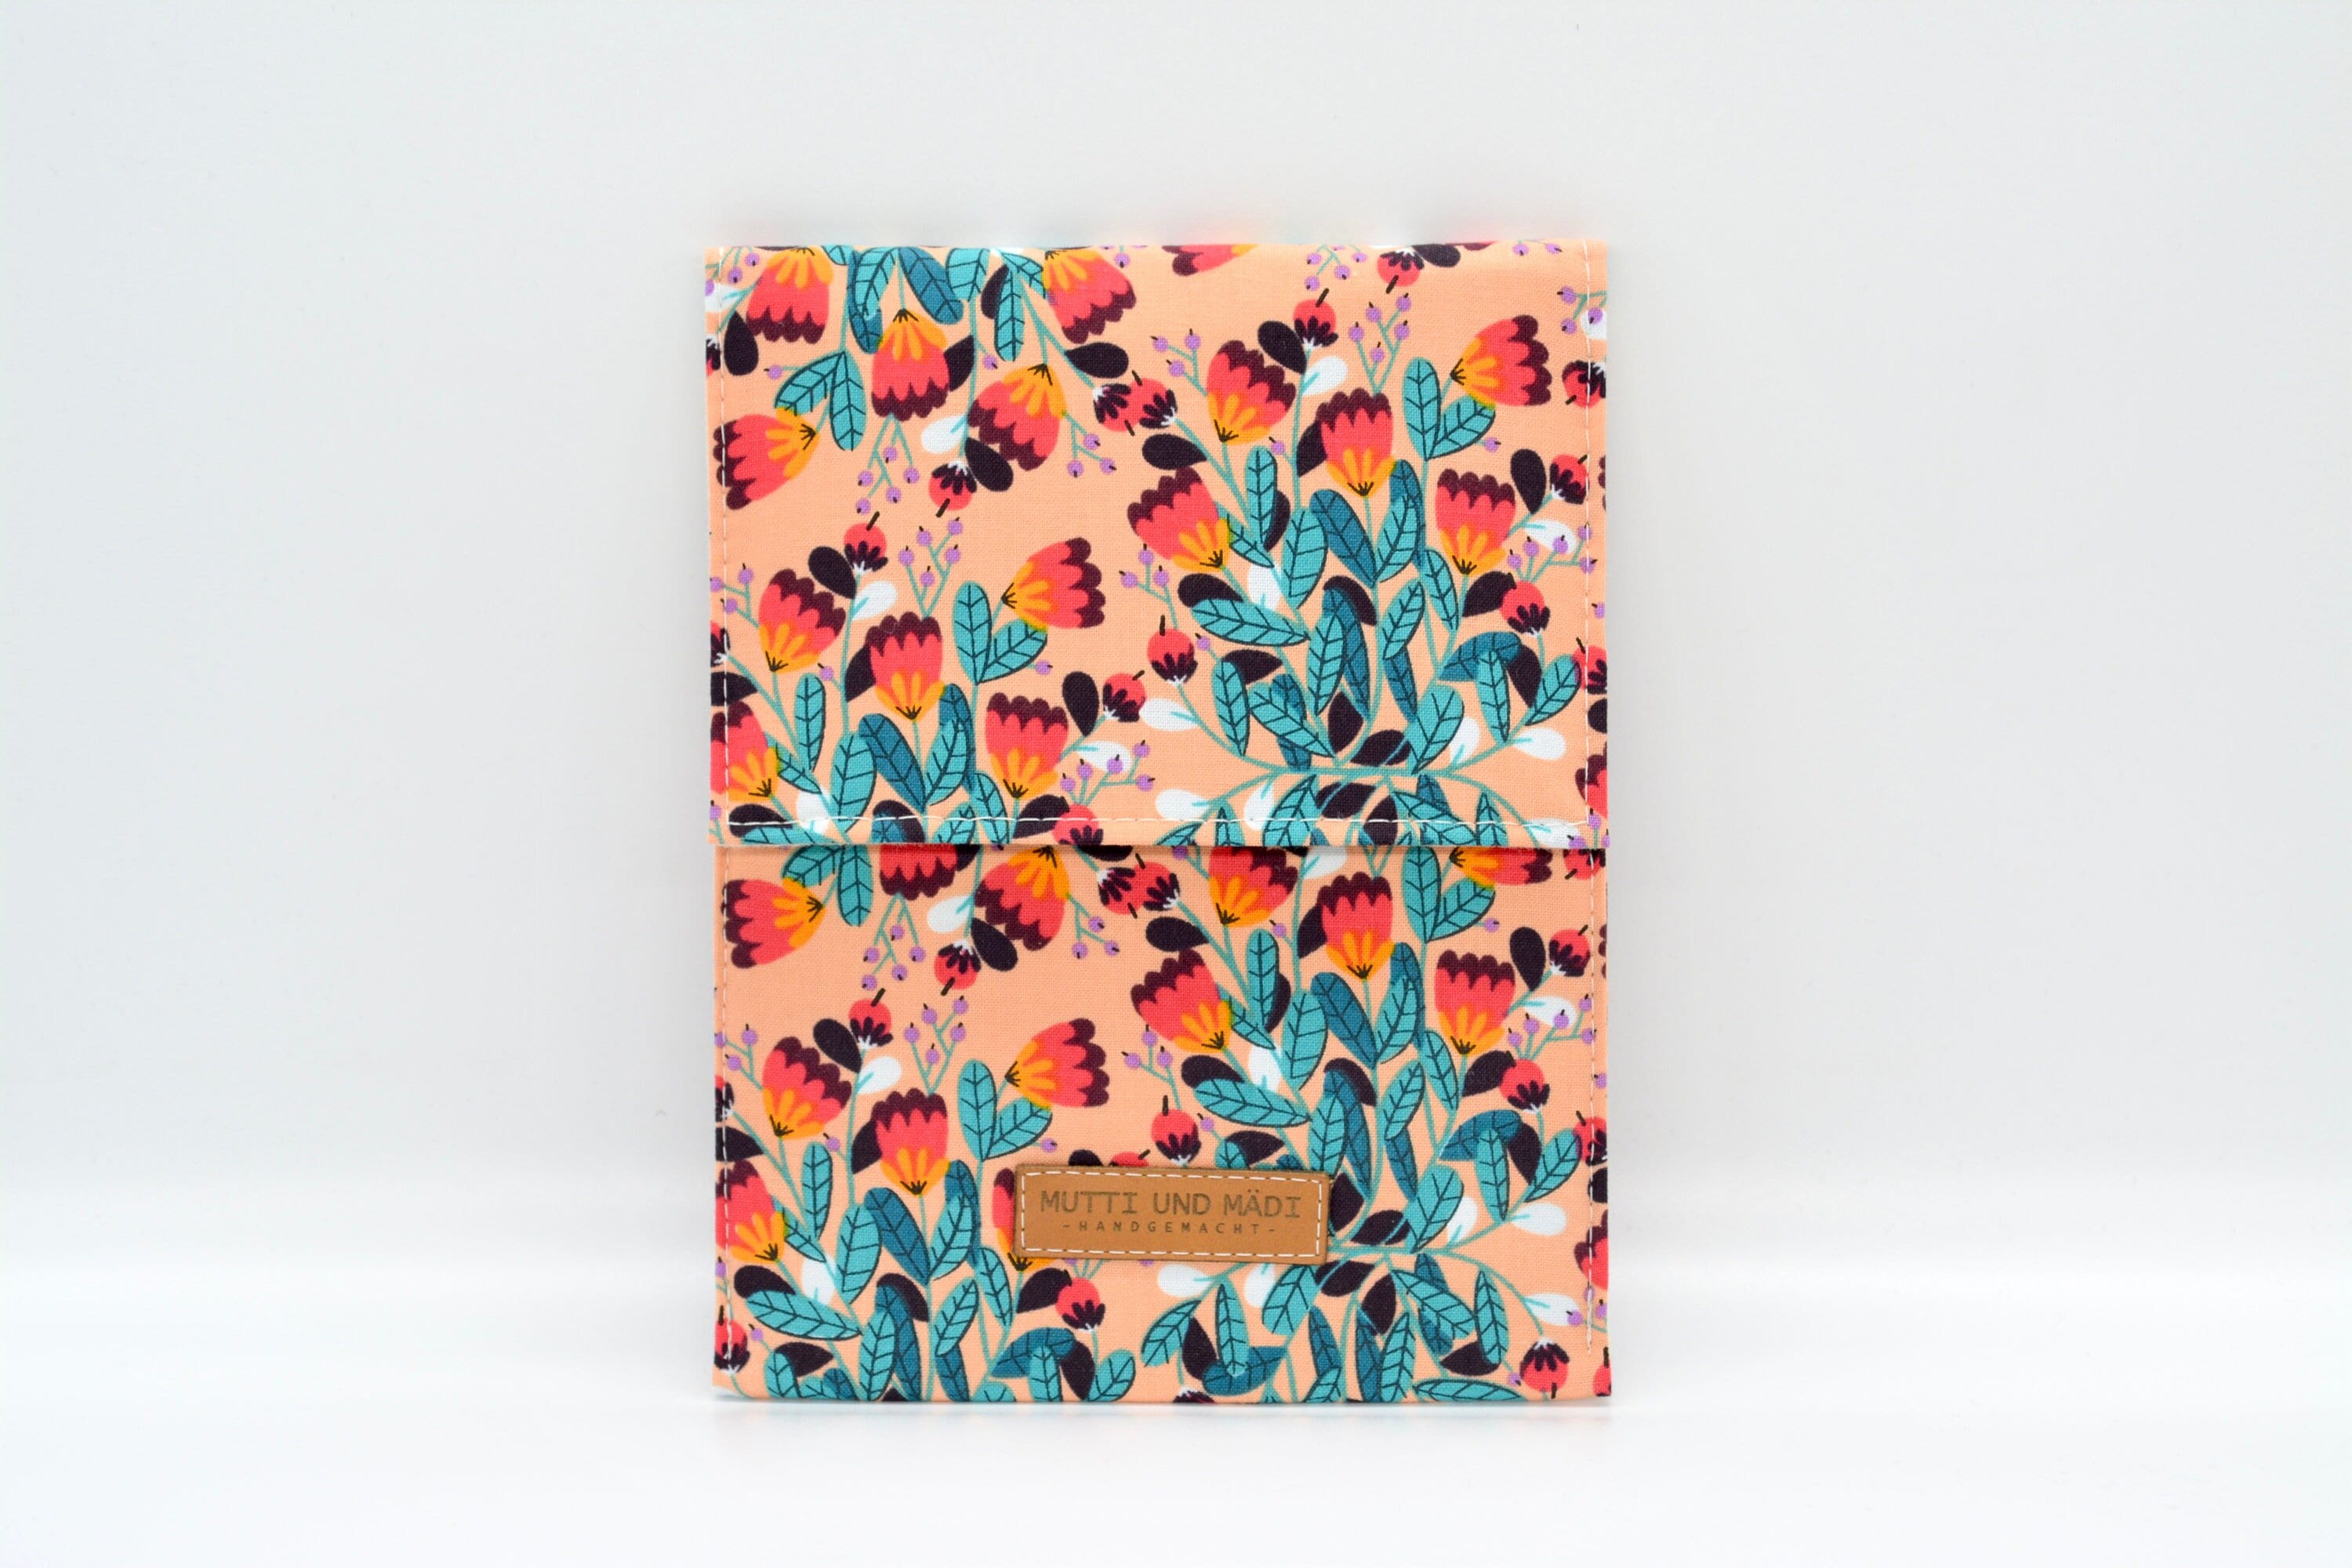 Cover Luxe Kobo Aura Edition 2 Rouge